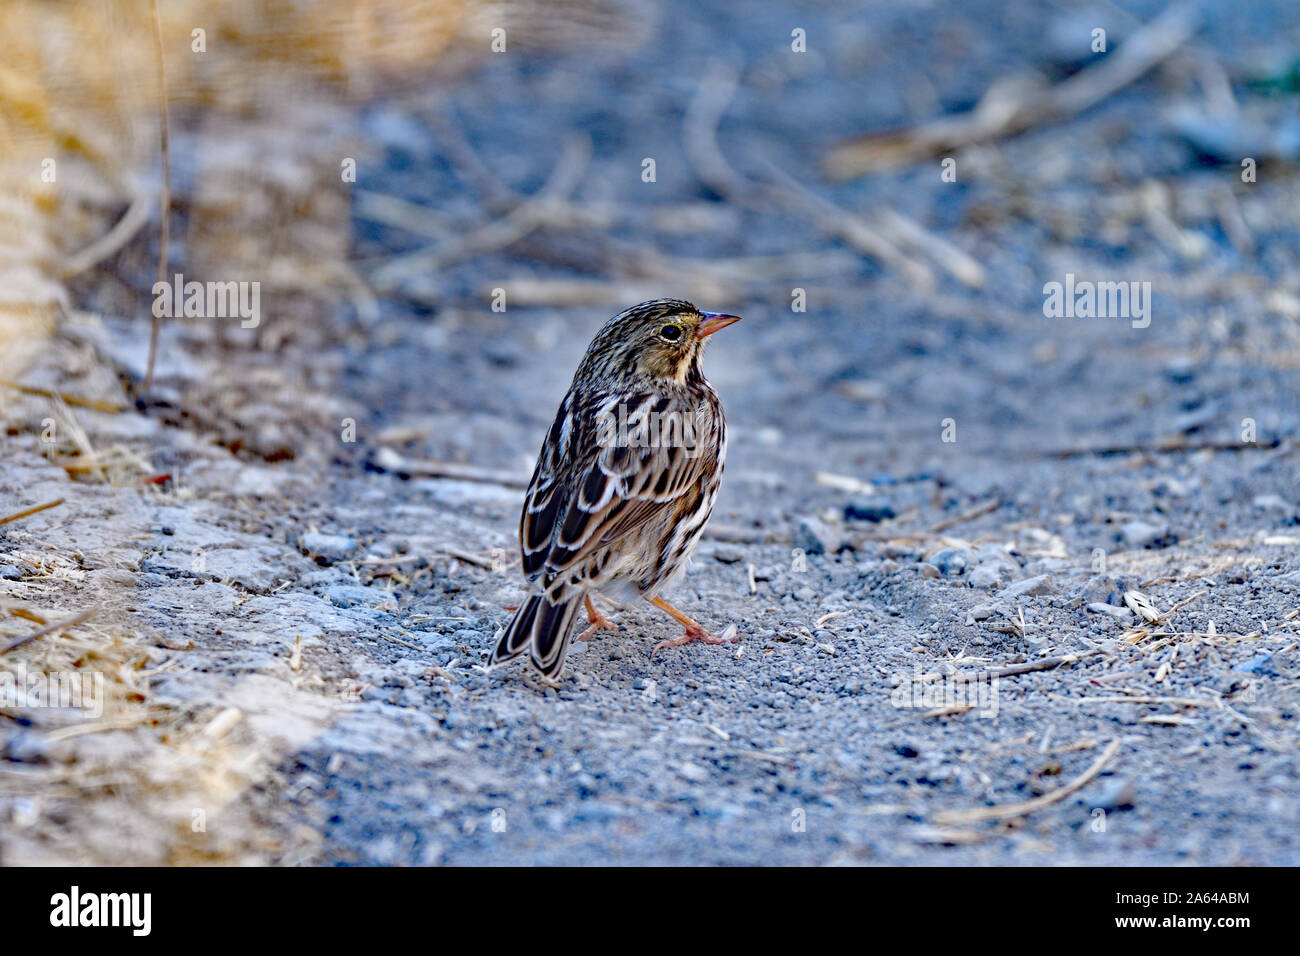 A Pictorial Pipit Wondering Around Stock Photo